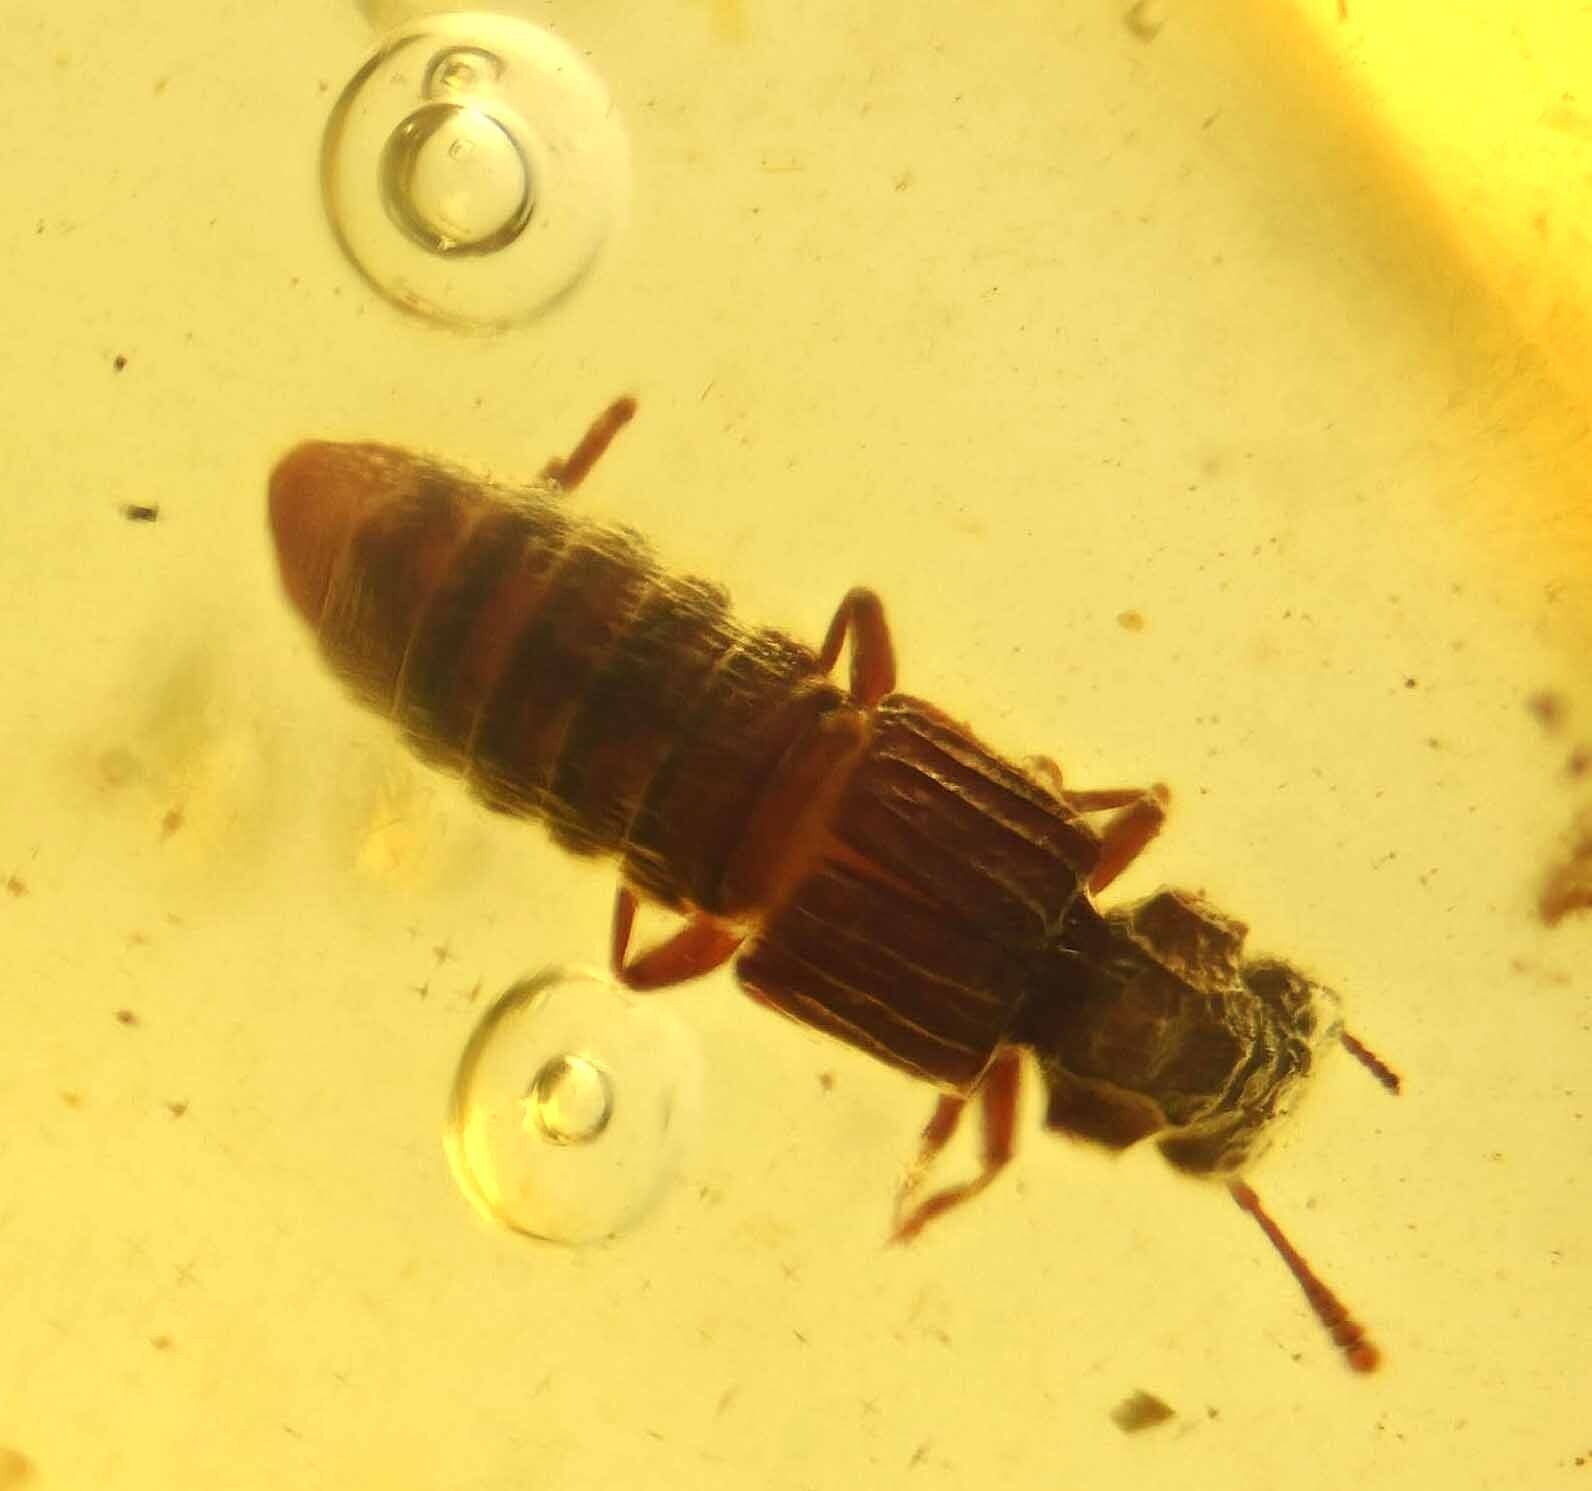 Rare Staphylinidae (Rove Beetle), Fossil Inclusion in Dominican Amber